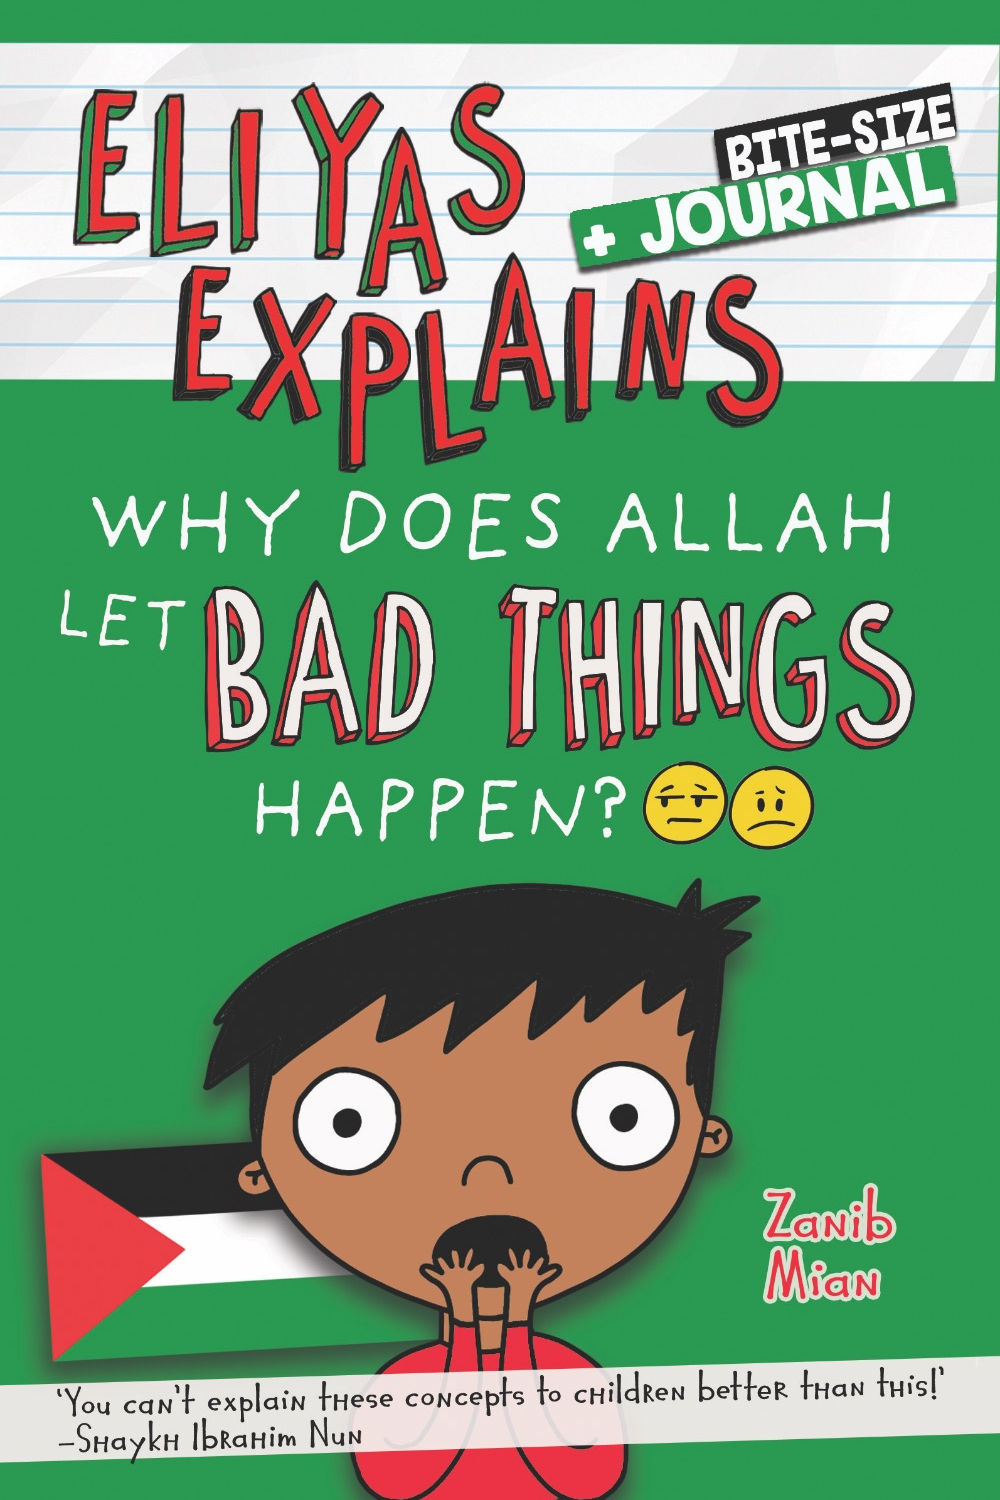 Eliyas Explains : Why Does Allah Let Bad Things Happen?